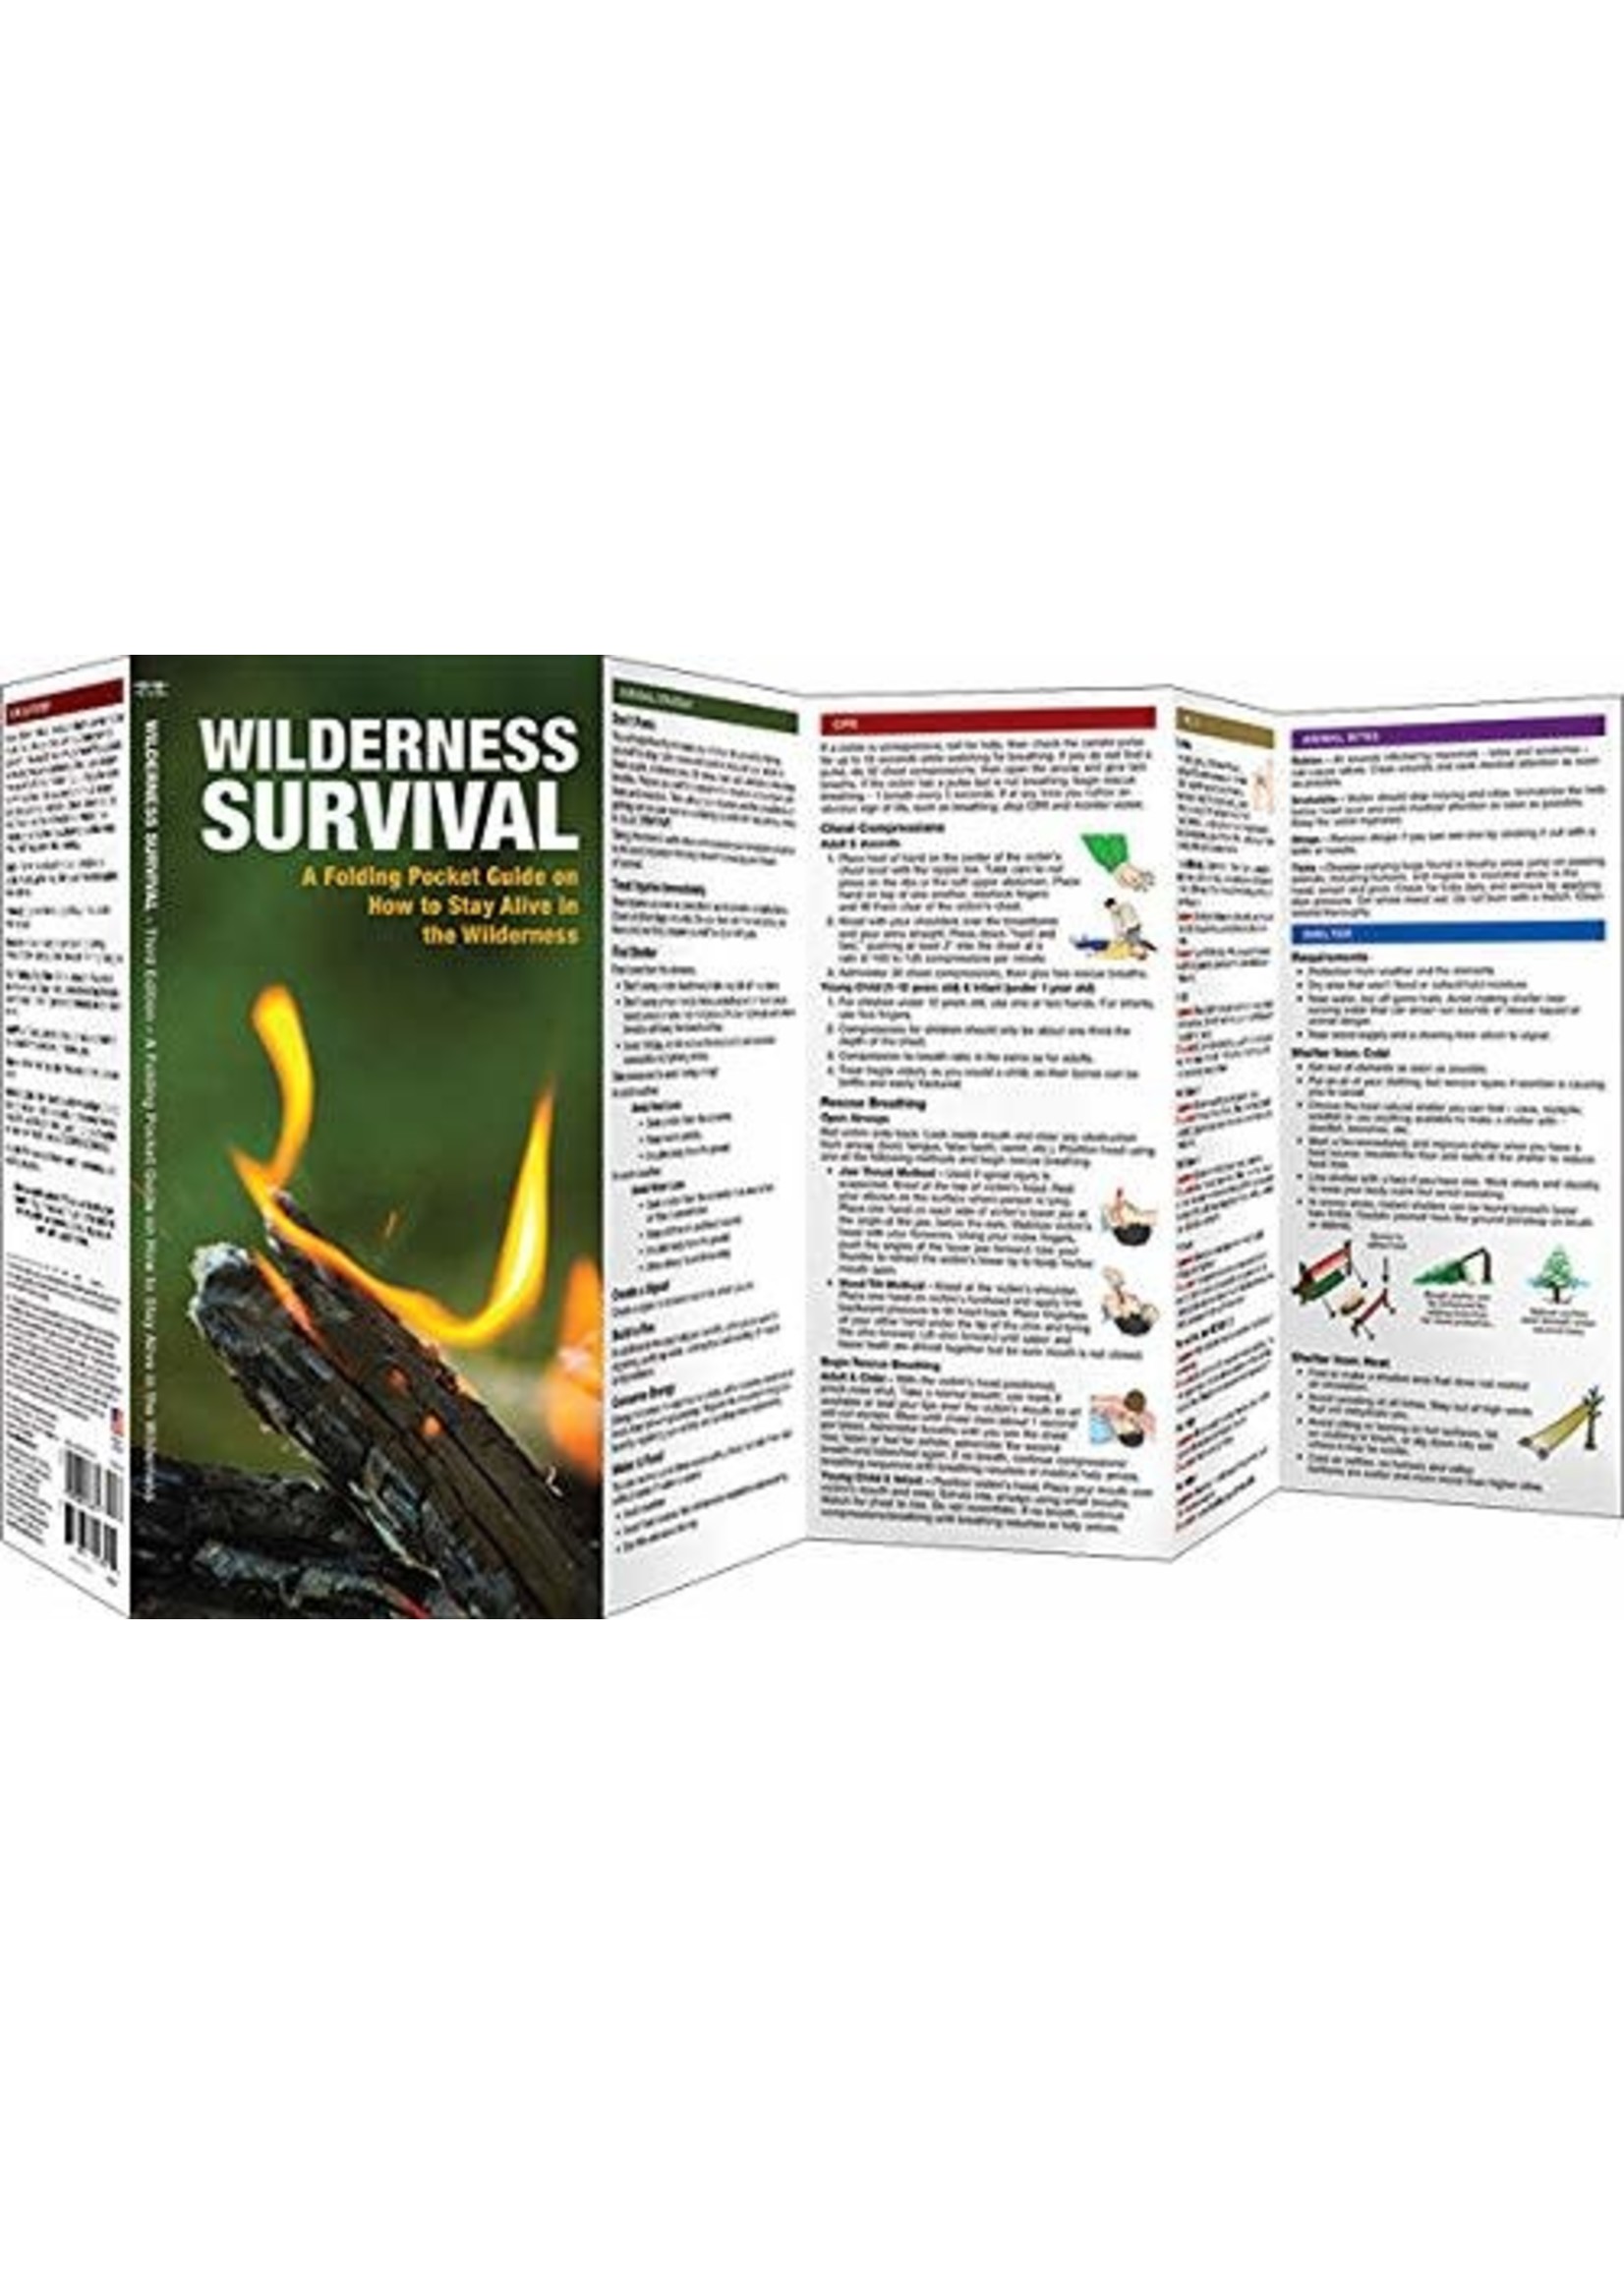 Wilderness Survival: A Folding Pocket Guide on How to Stay Alive in the Wilderness